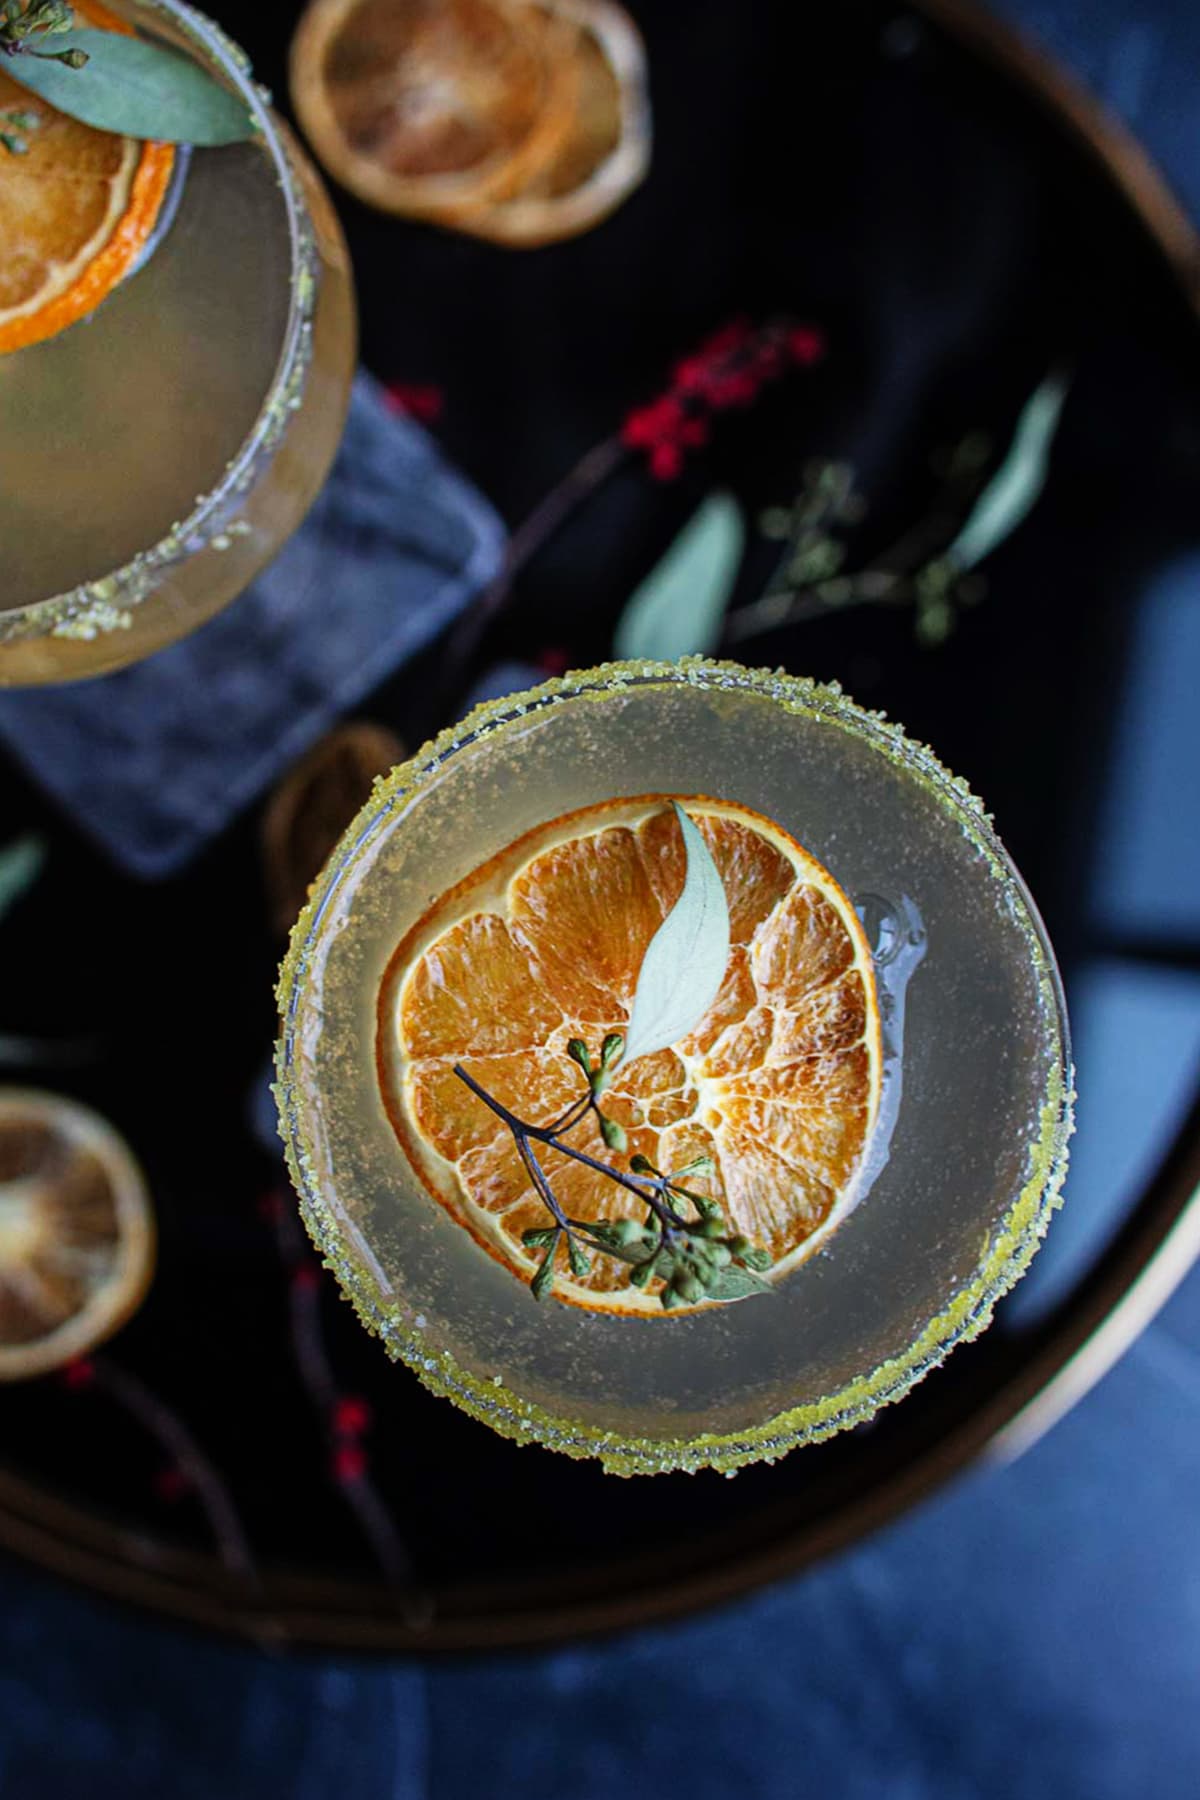 The Orange Blossom is a delightful, elegant cocktail made with gin, orange blossom simple syrup, citrus juice, and bitters, floated with sparkling wine. It's festive and cheery and the perfect drink to celebrate the New Year! 